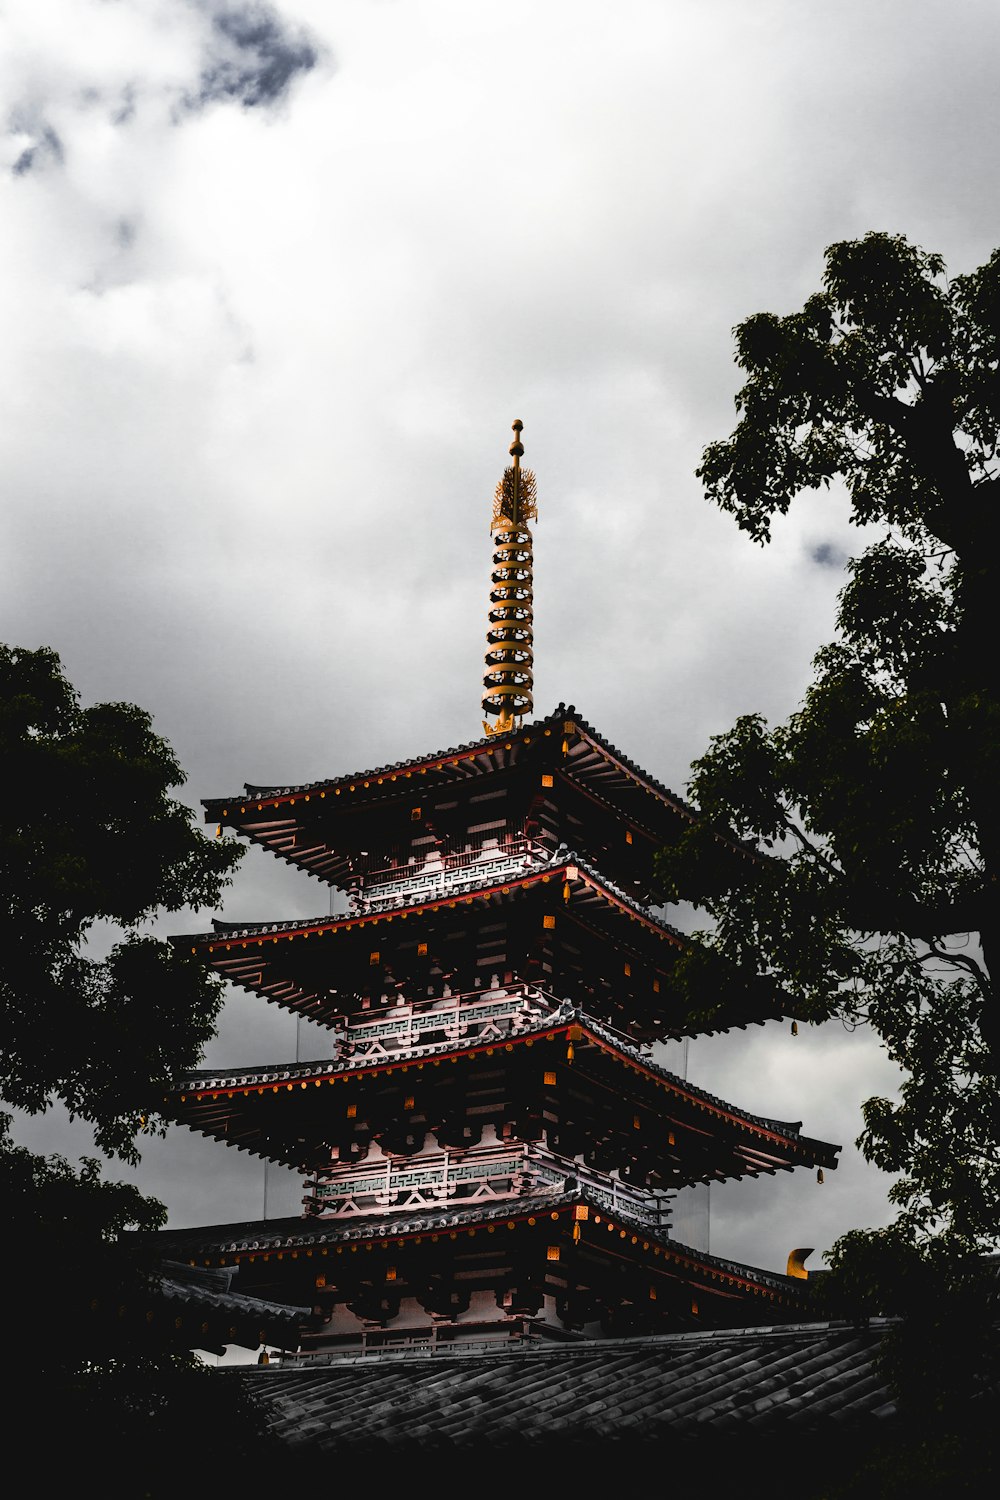 brown and white pagoda temple